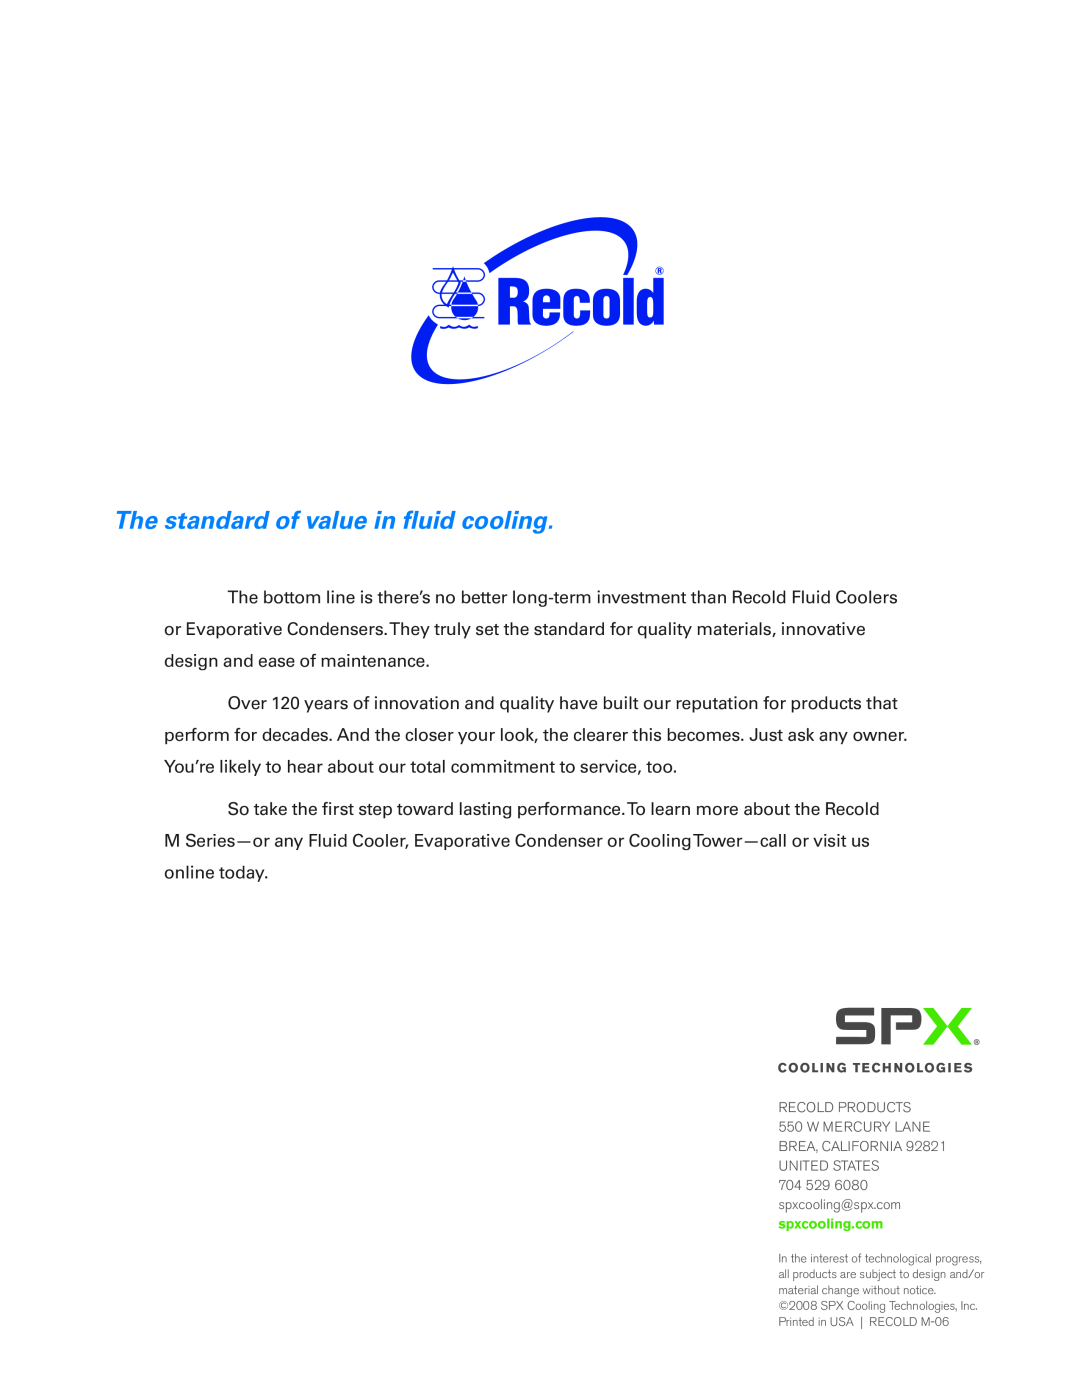 SPX Cooling Technologies Recold M manual The standard of value in fluid cooling, Recold Products 